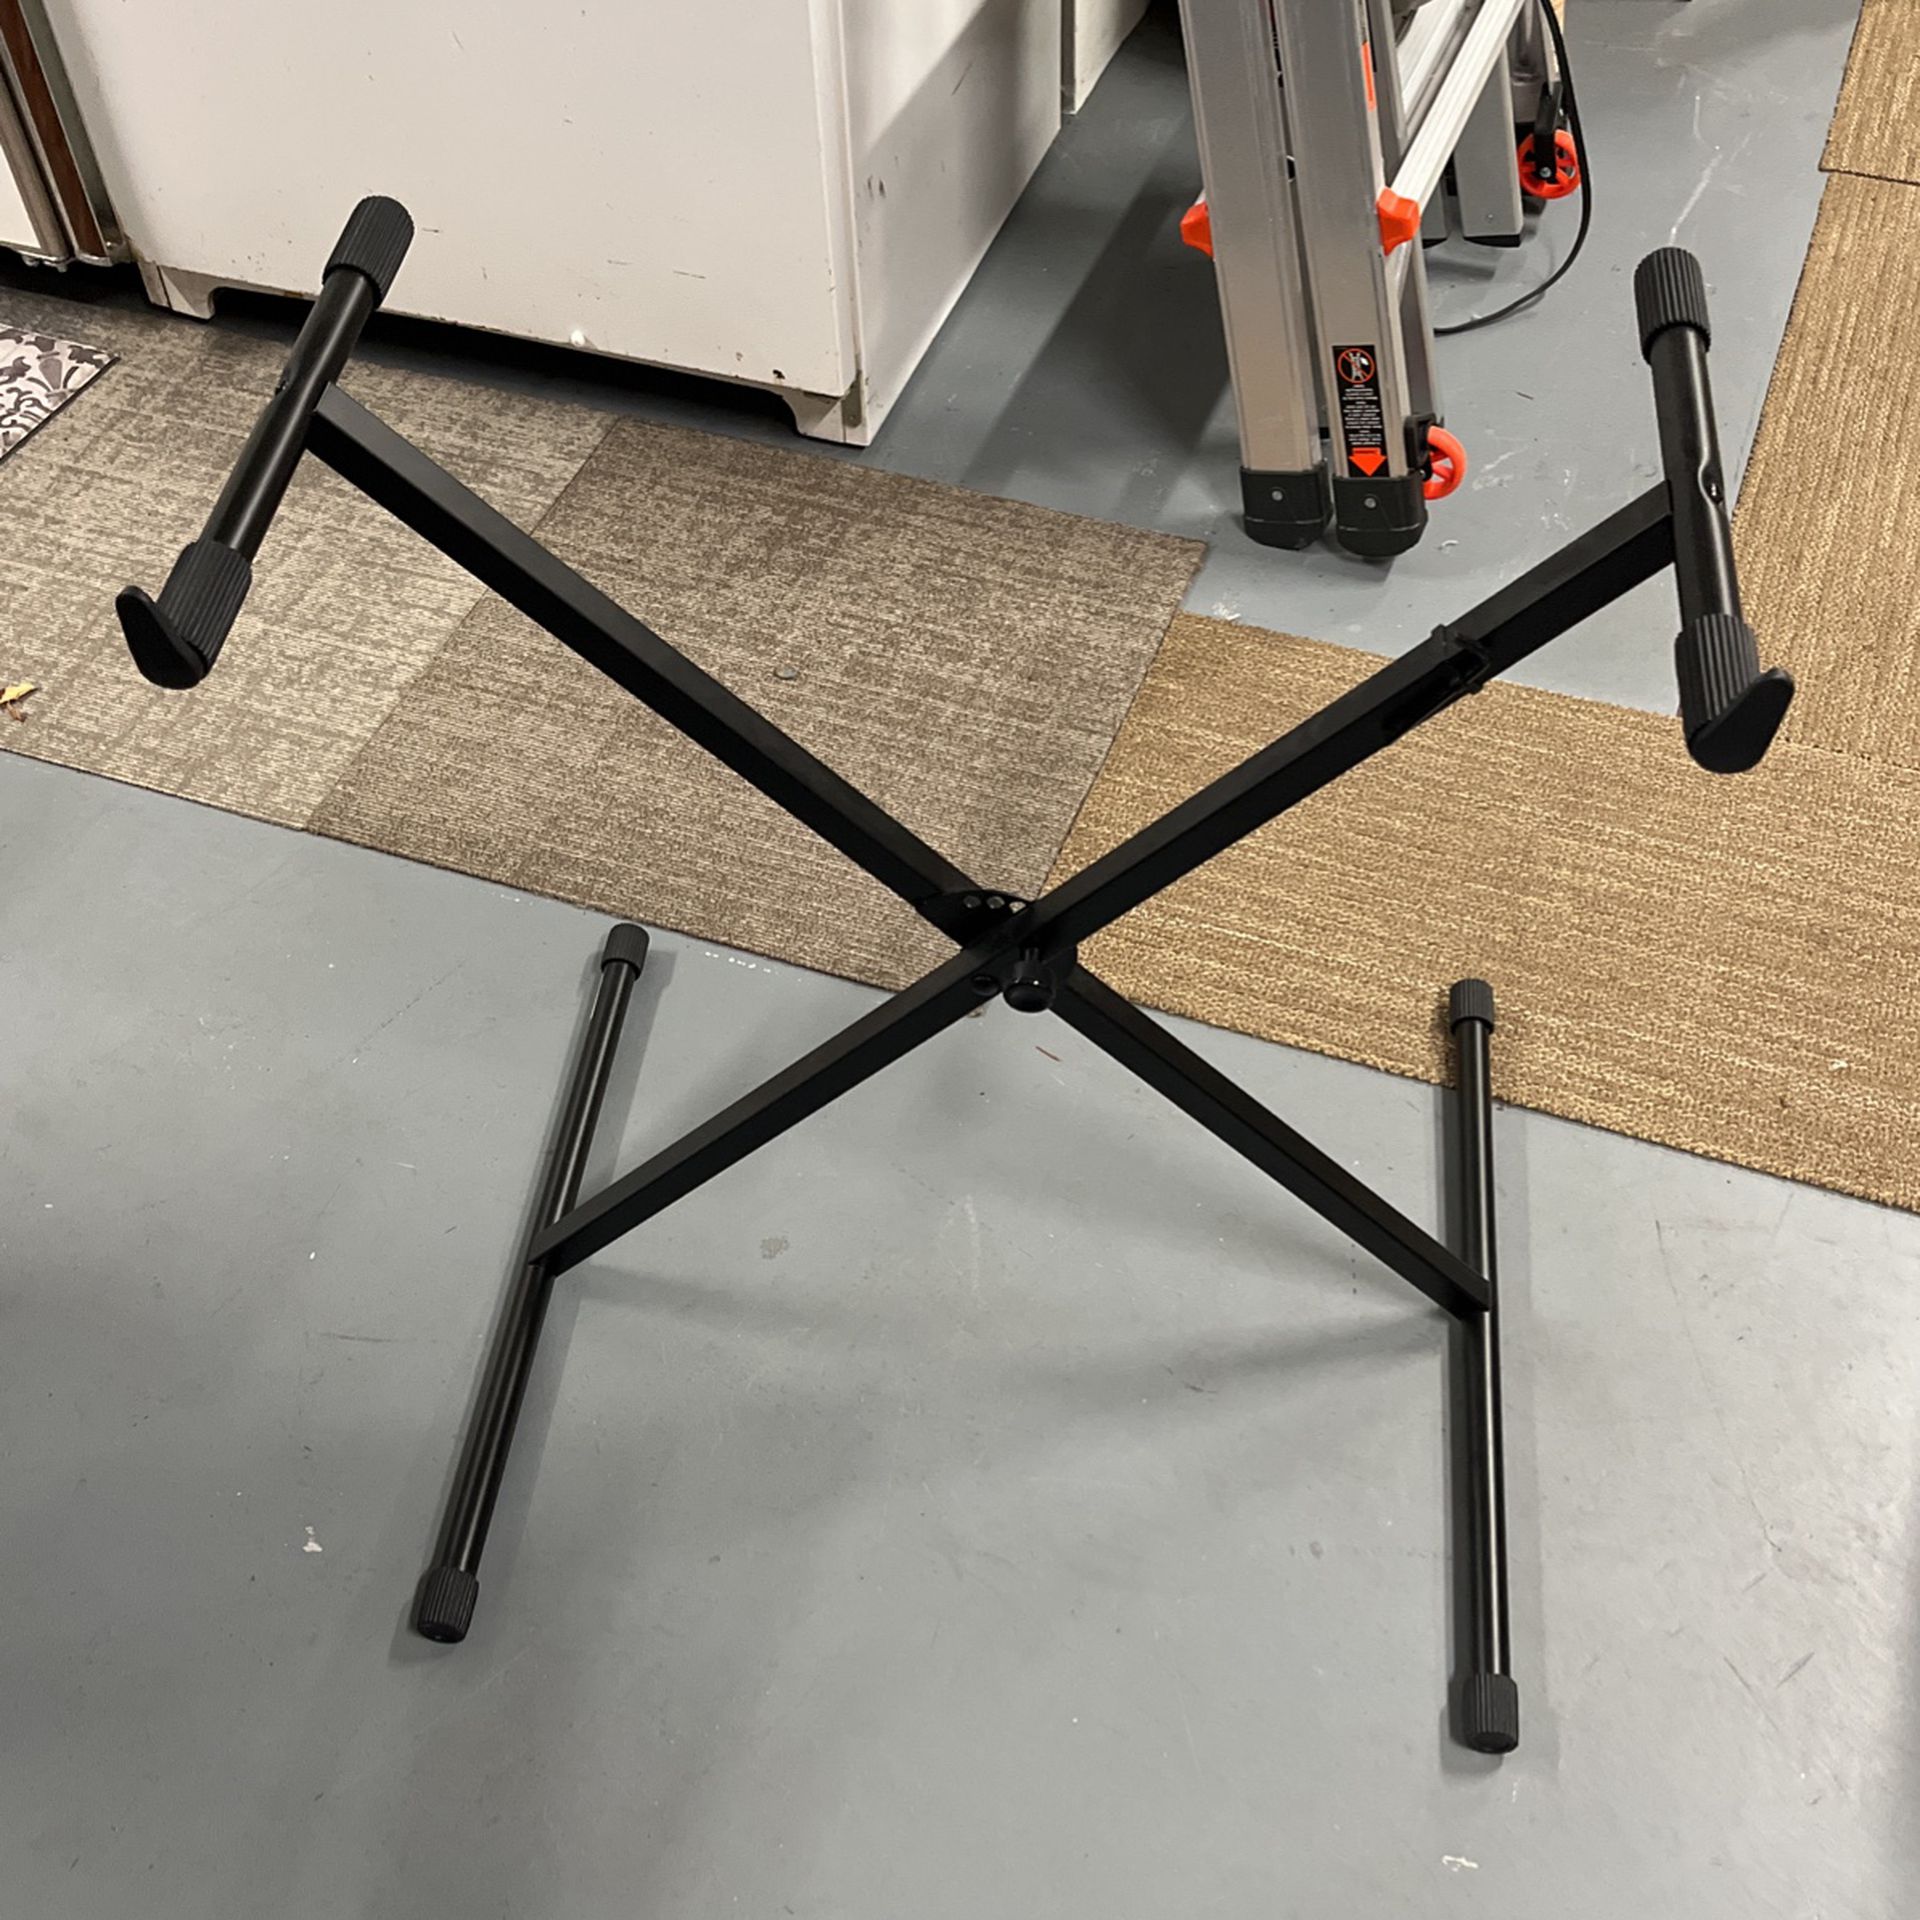 Electric Keyboard Stand Never Used